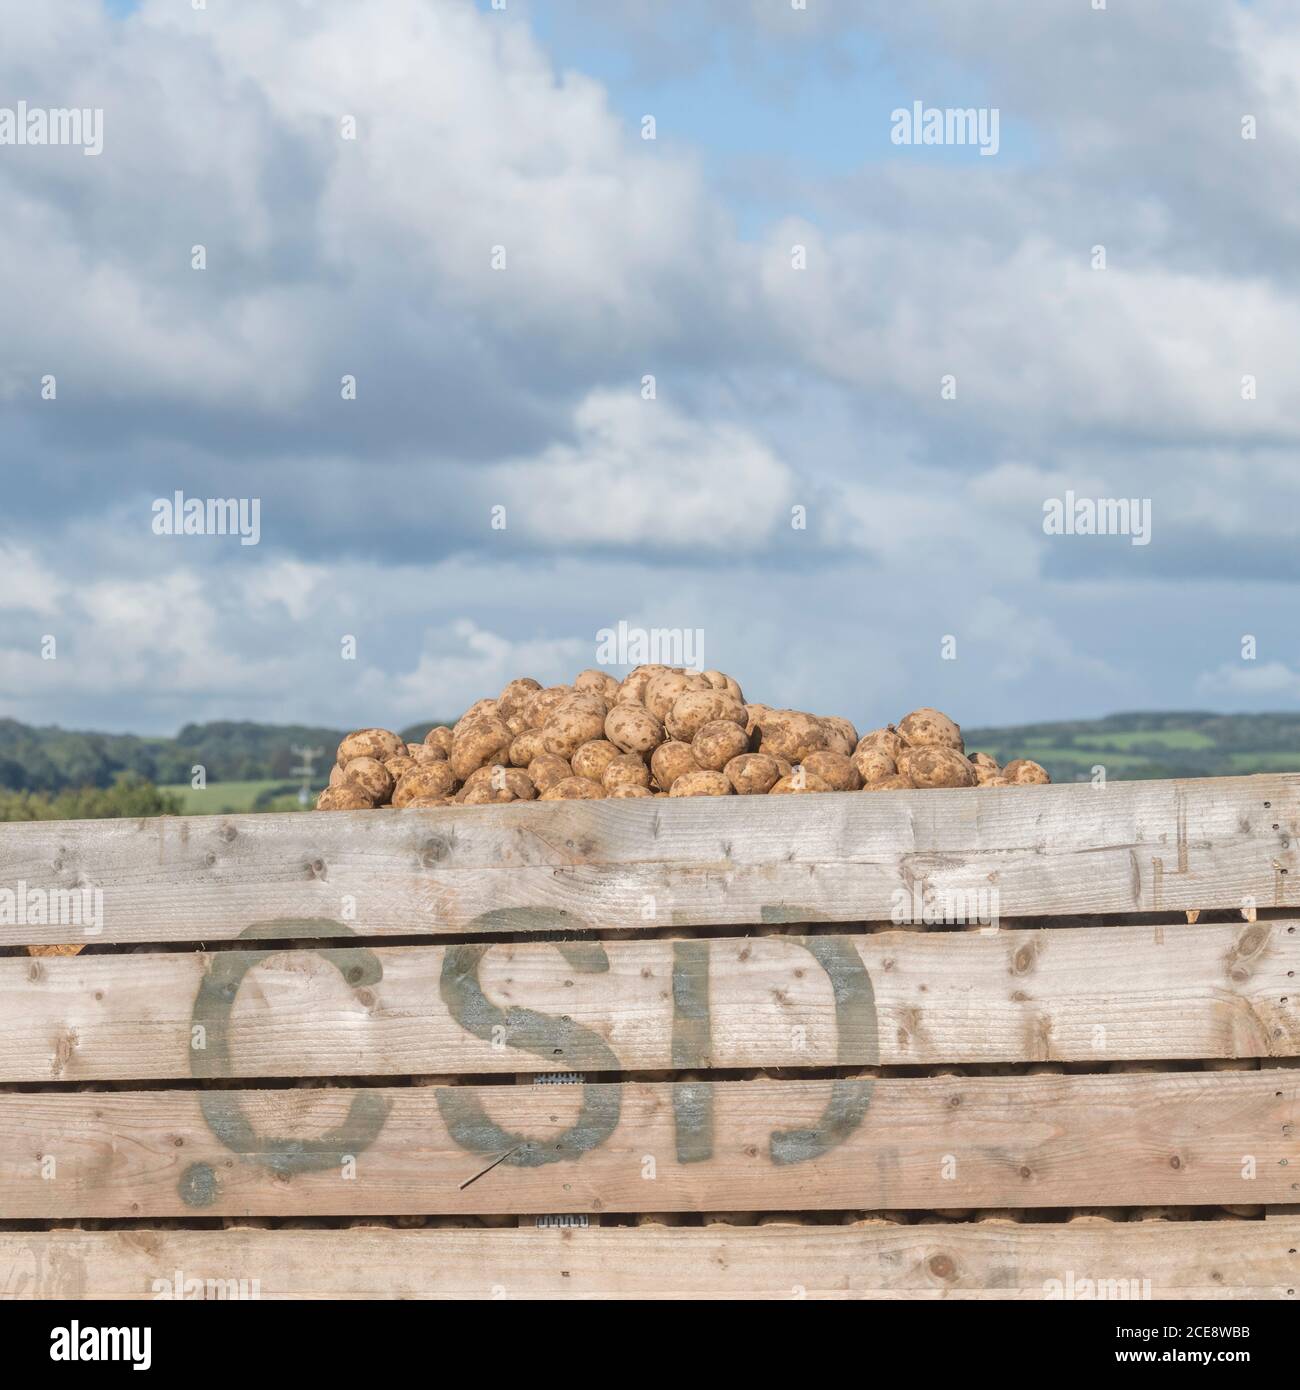 Offloaded harvested potatoes piled in a wooden storage box carried on a trailer working side-by-side in tandem with the potato harvesting machinery. Stock Photo